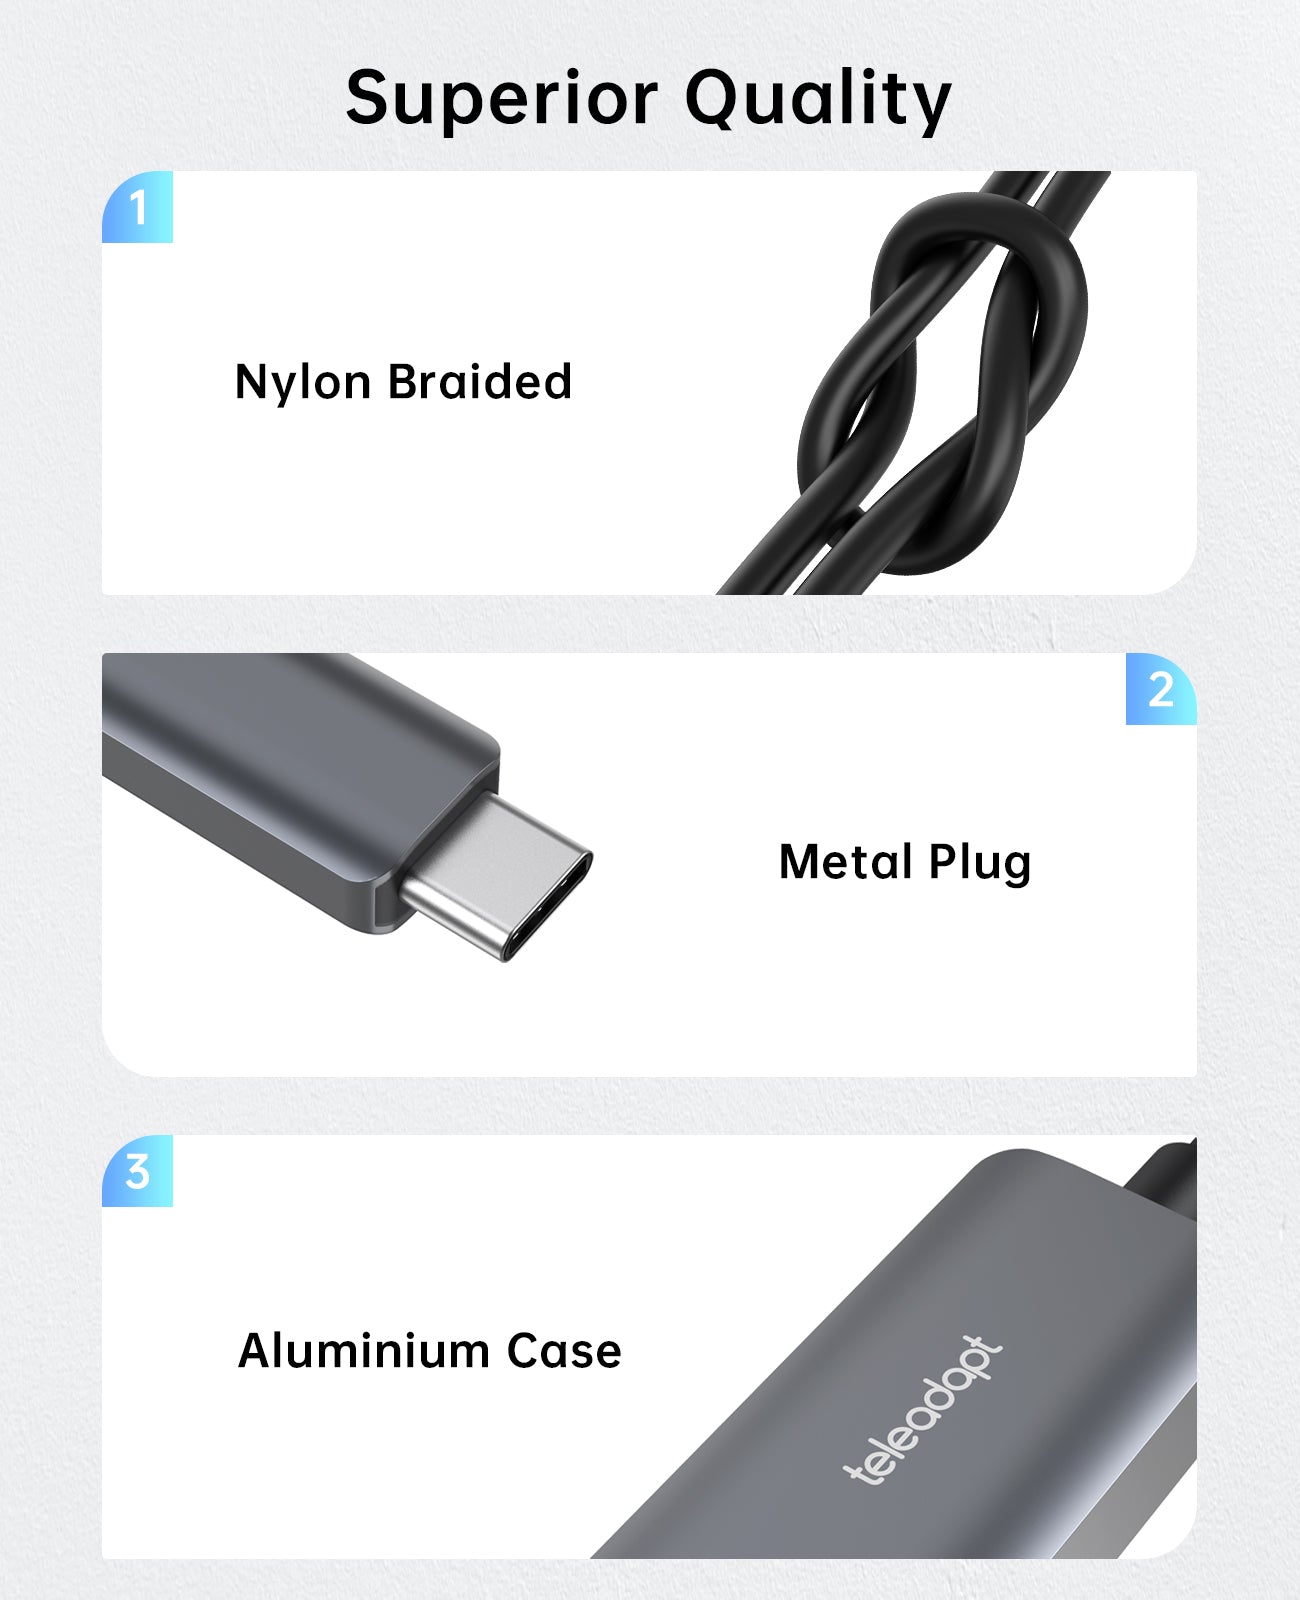 USB C Male to HDMI Male